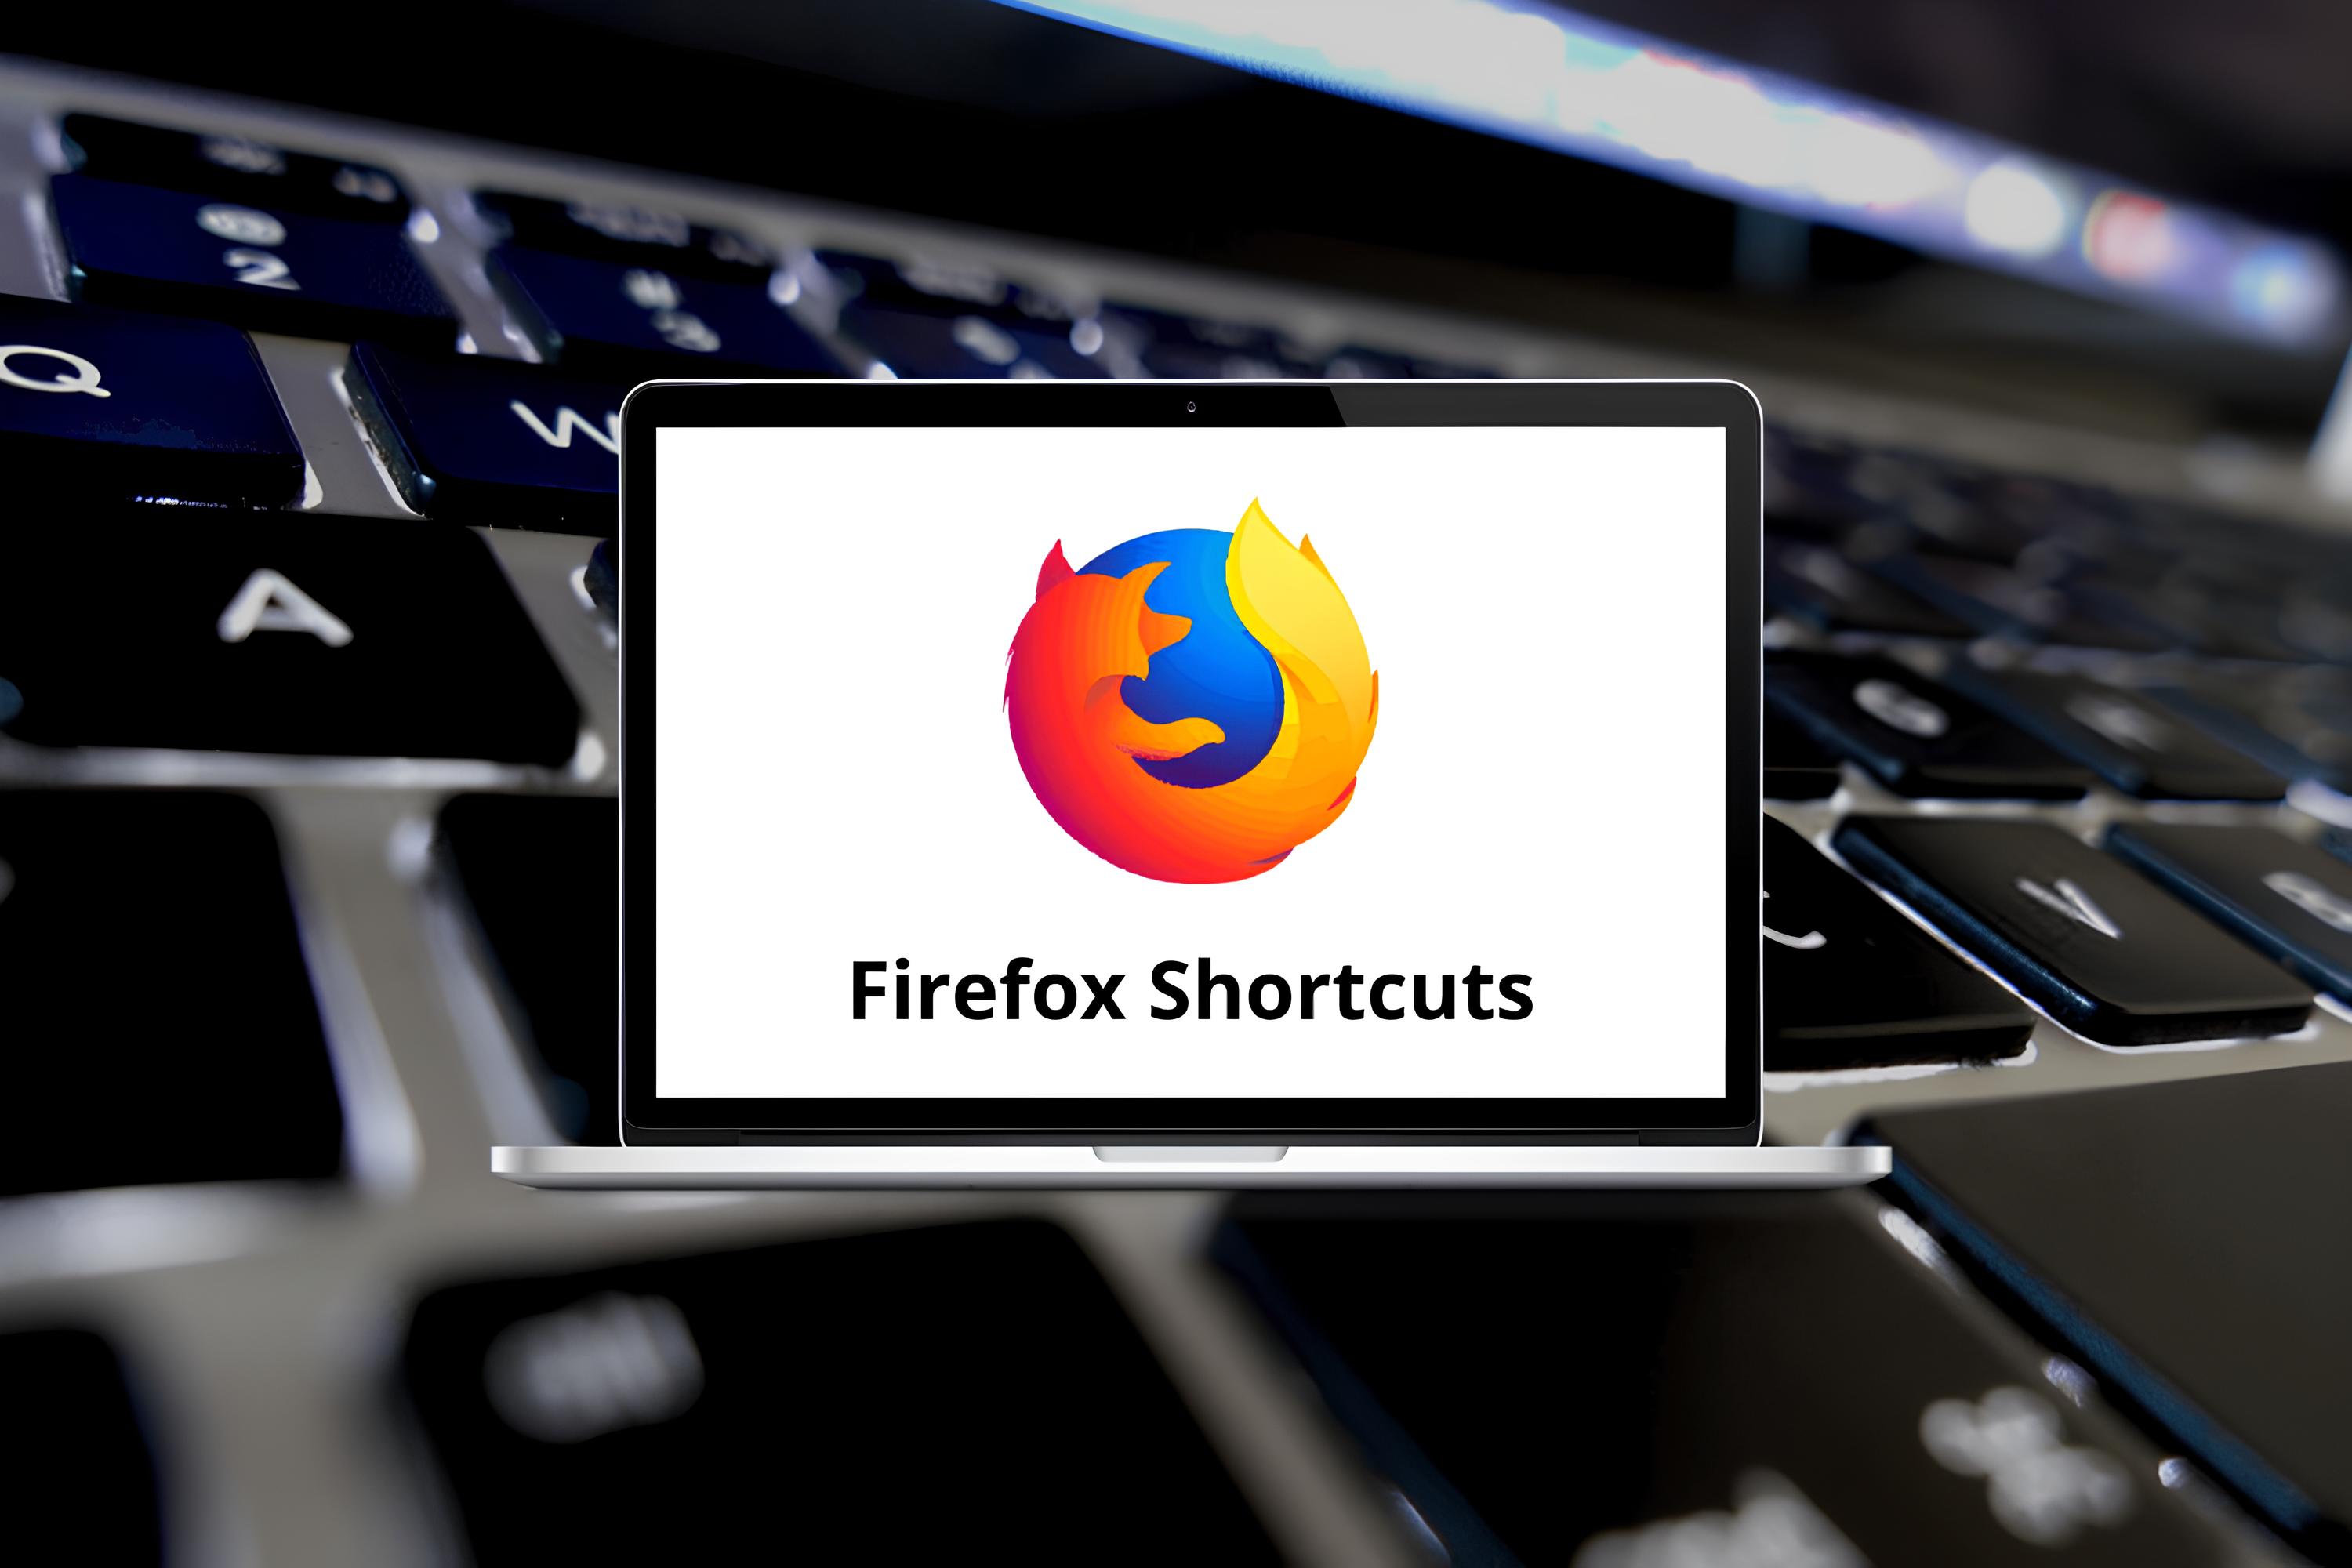 How To Make Firefox Shortcut